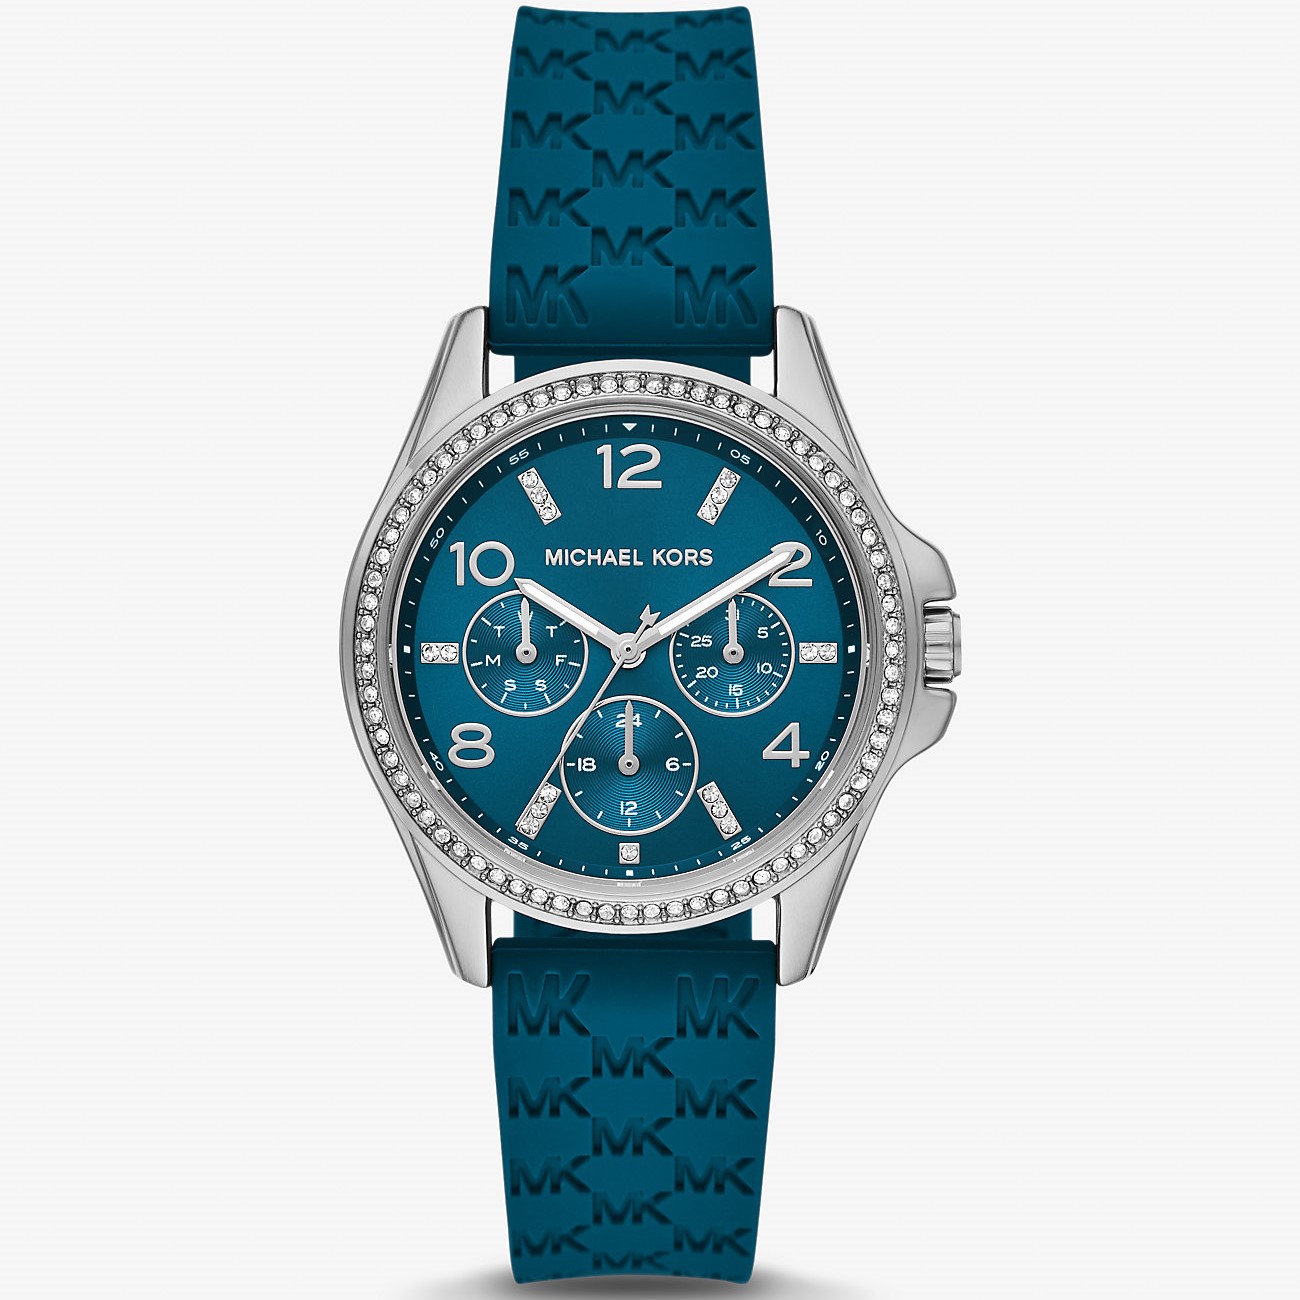 ĐỒNG HỒ MK NỮ MICHAEL KORS MINI PILOT PAVÉ SILVER-TONE AND LOGO SILICONE TEAL WATCH MKO1004 3